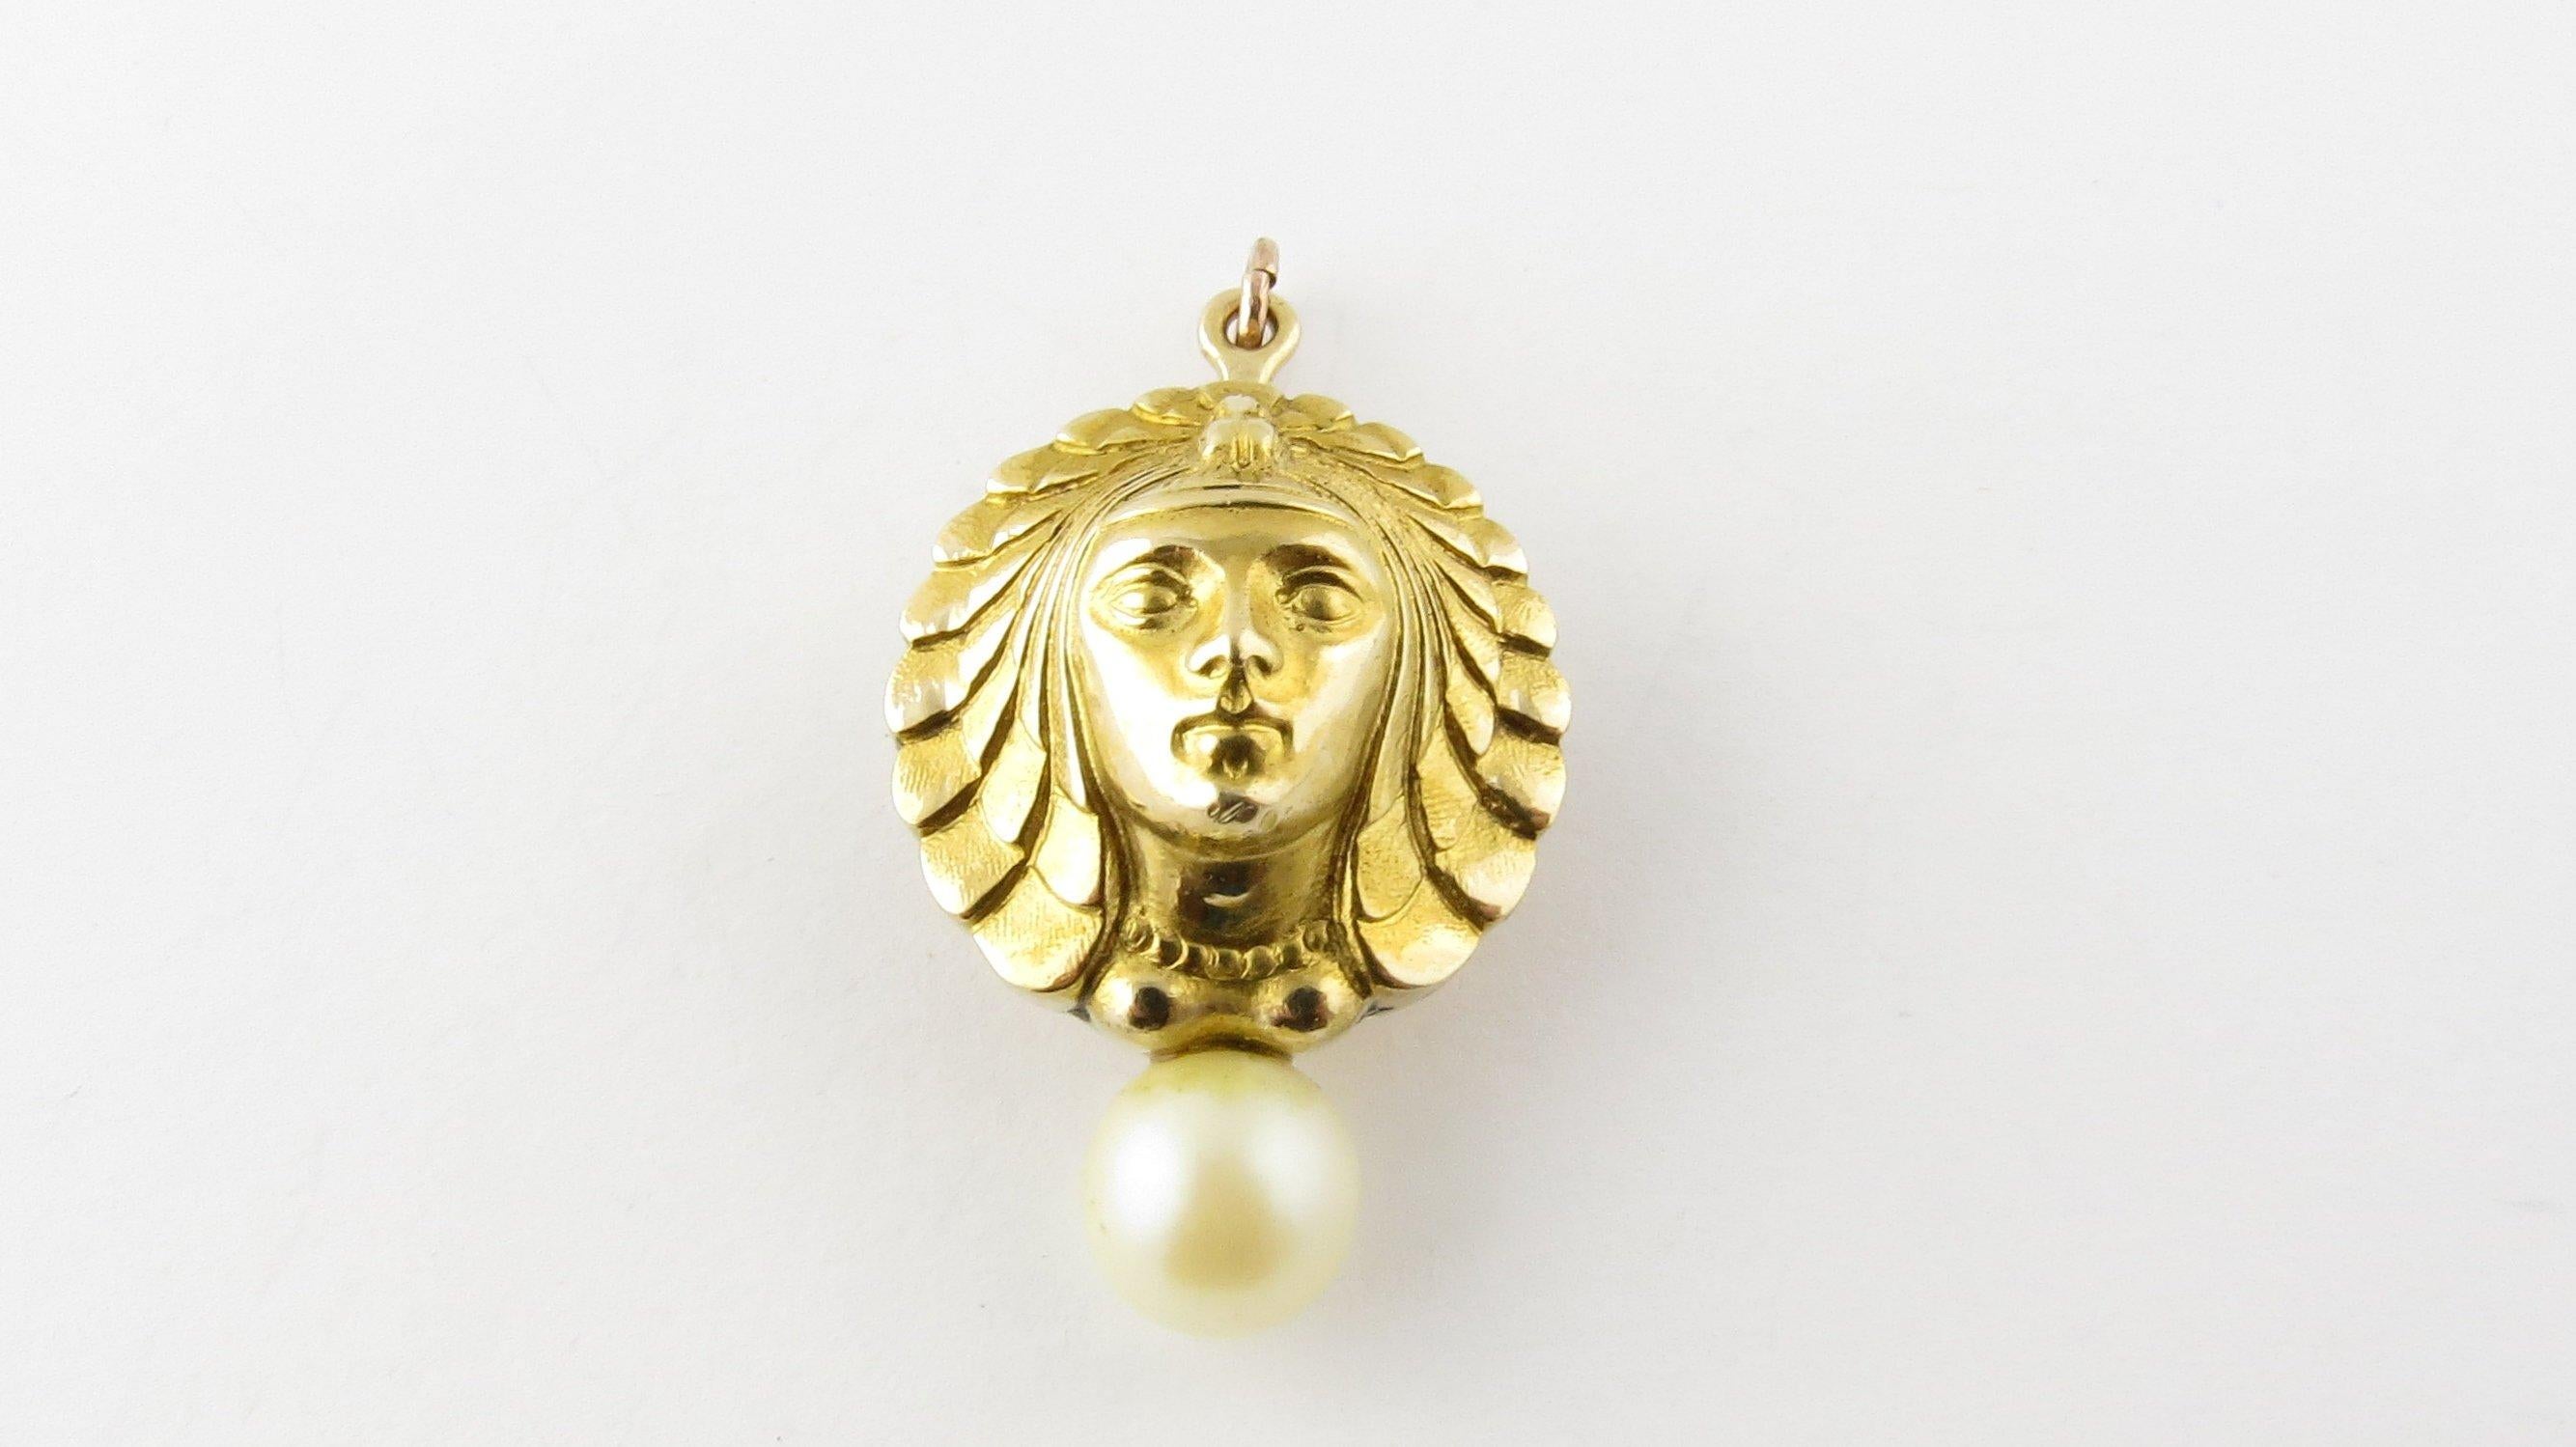 Vintage 18 Karat Yellow Gold and Pearl Goddess Pendant/Brooch- 
This regal piece features a stunning goddess accented with one 7 mm cultured pearl. Can be worn as a brooch or a pendant. Beautifully detailed in 18K yellow gold. 
Size: 32 mm x 19 mm